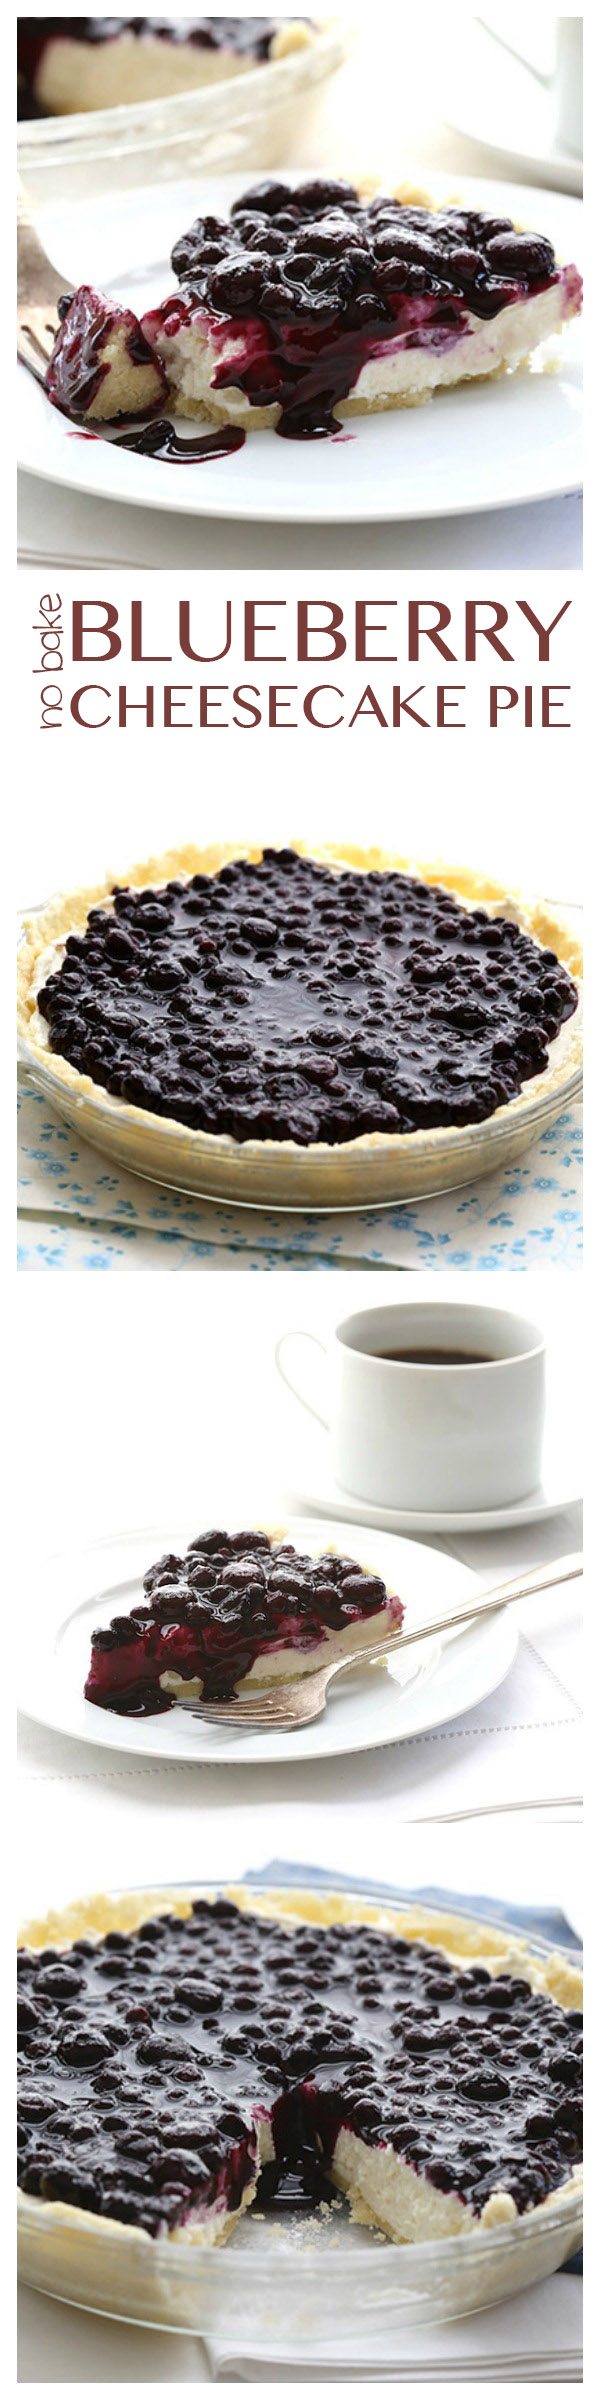 The best low carb no-bake dessert! Creamy cheesecake in an almond flour crust with sugar-free blueberry topping. Perfect for those days you just don't want to turn on the oven.